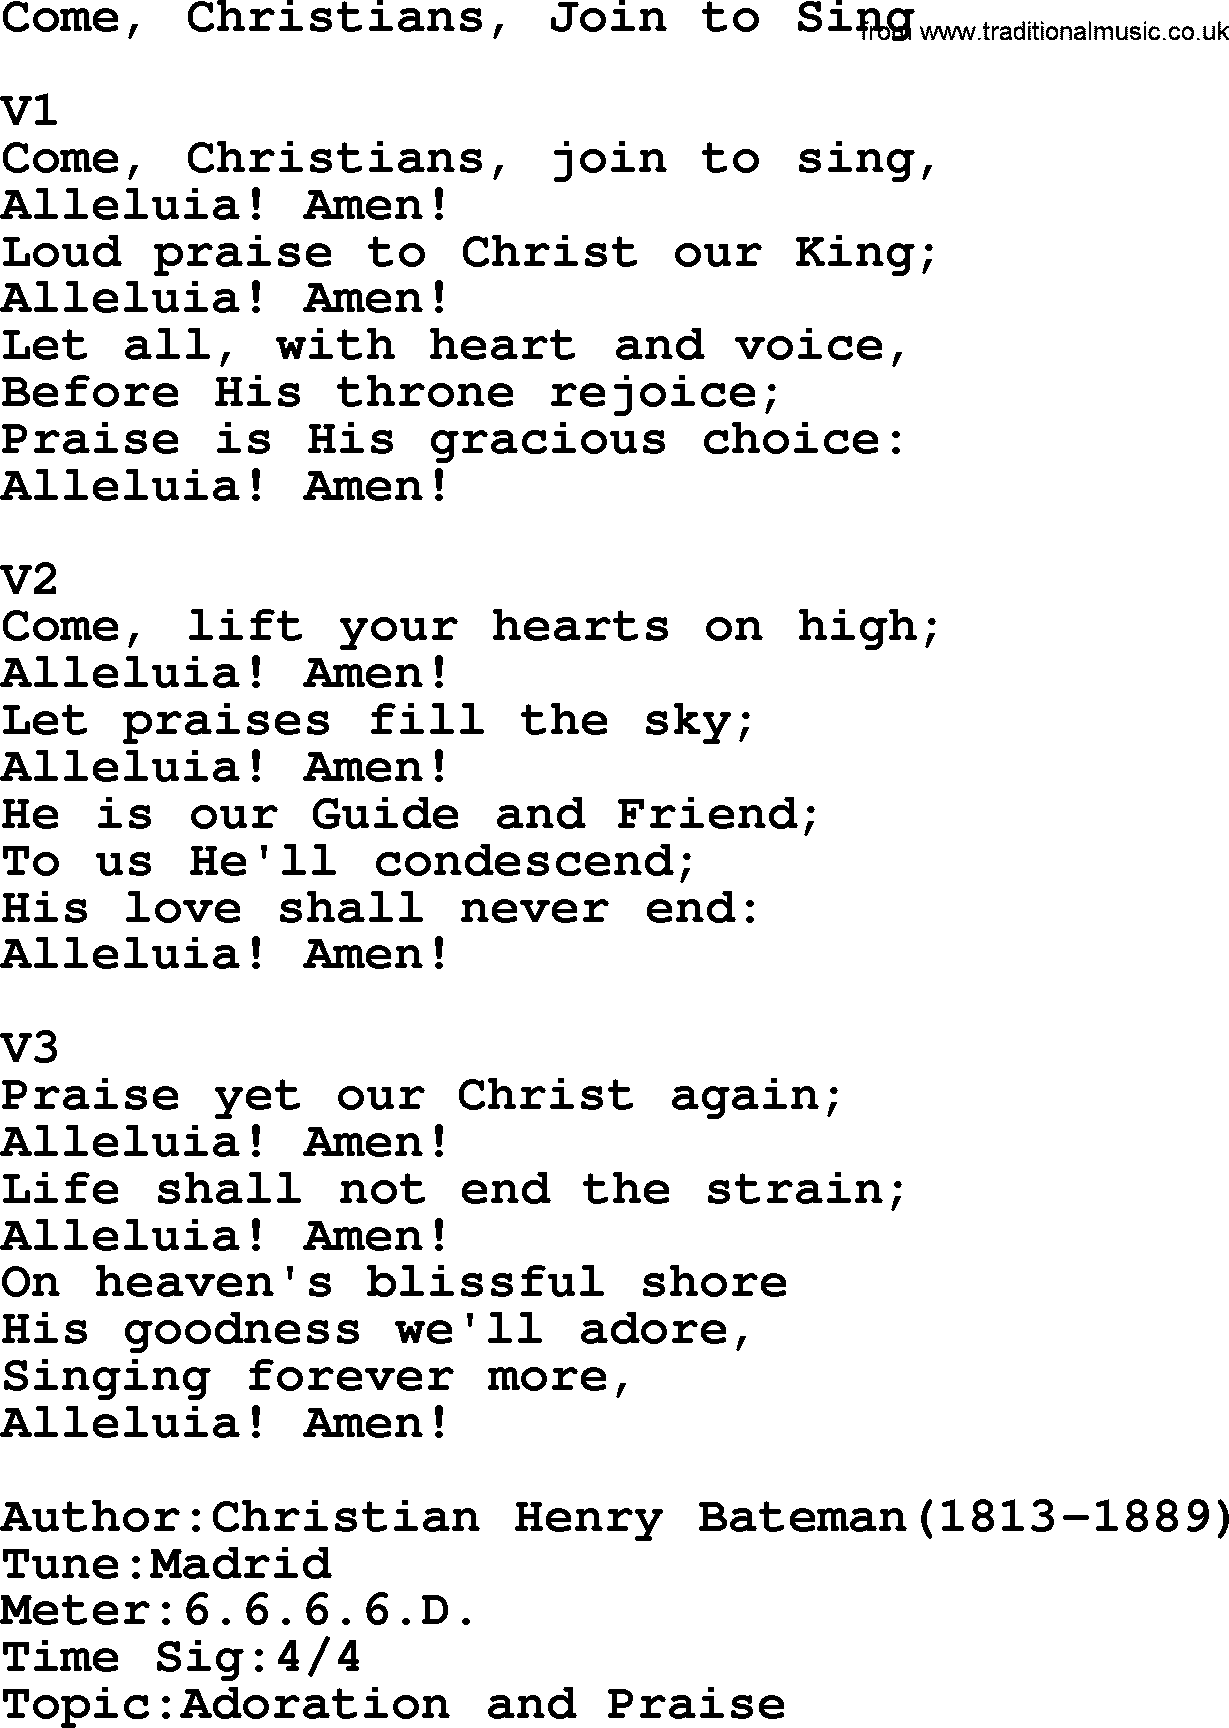 Adventist Hynms collection, Hymn: Come, Christians, Join To Sing, lyrics with PDF